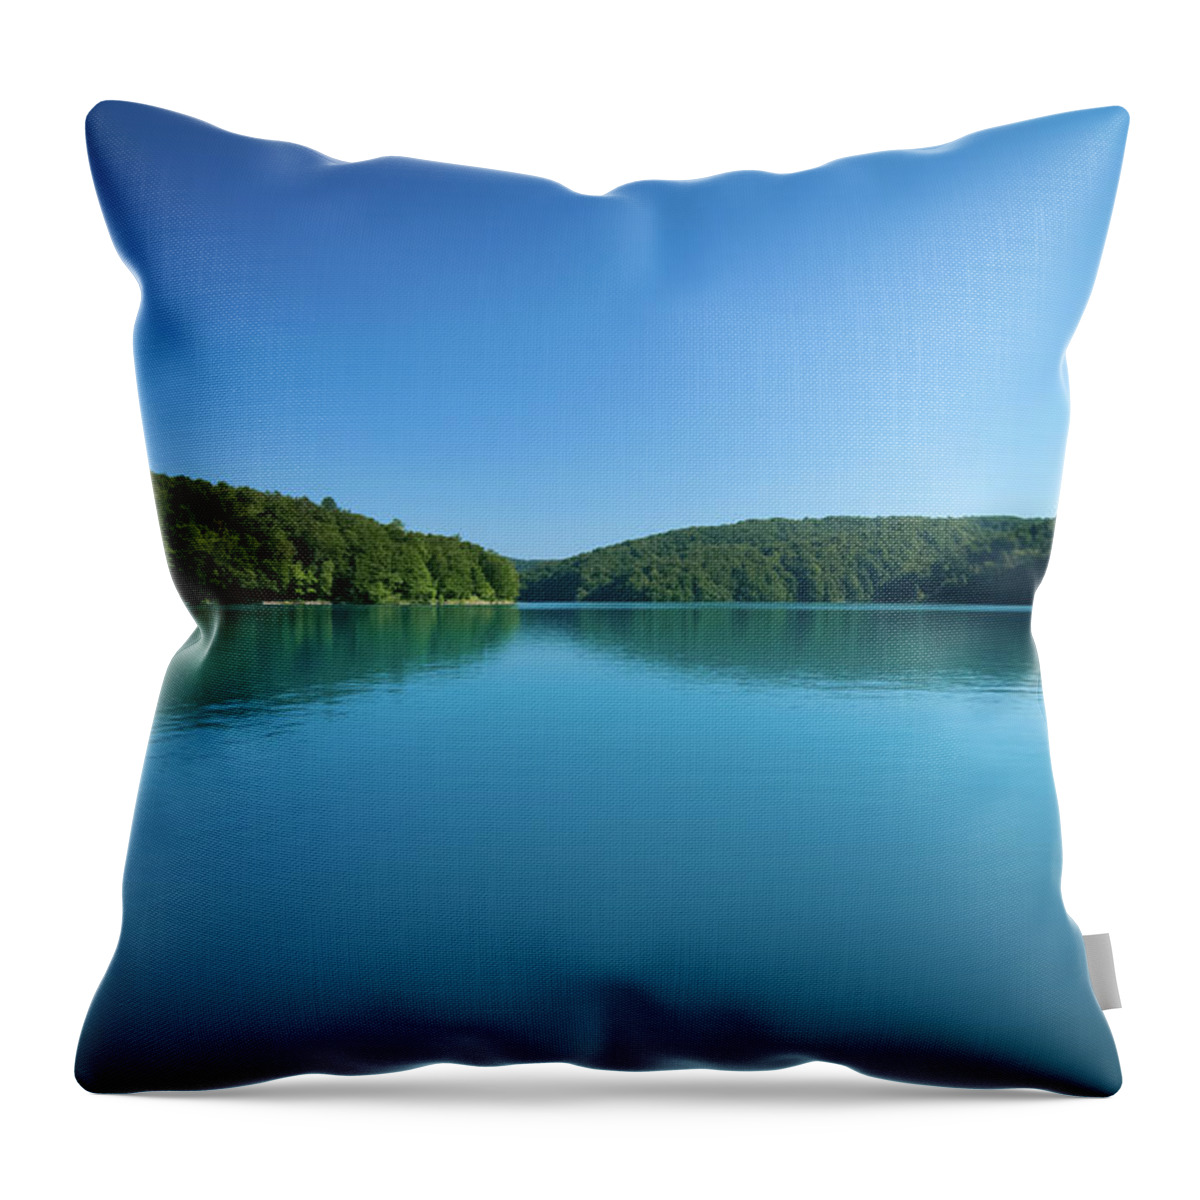 Scenics Throw Pillow featuring the photograph Serene Lake Of Plitvice by F.cadiou